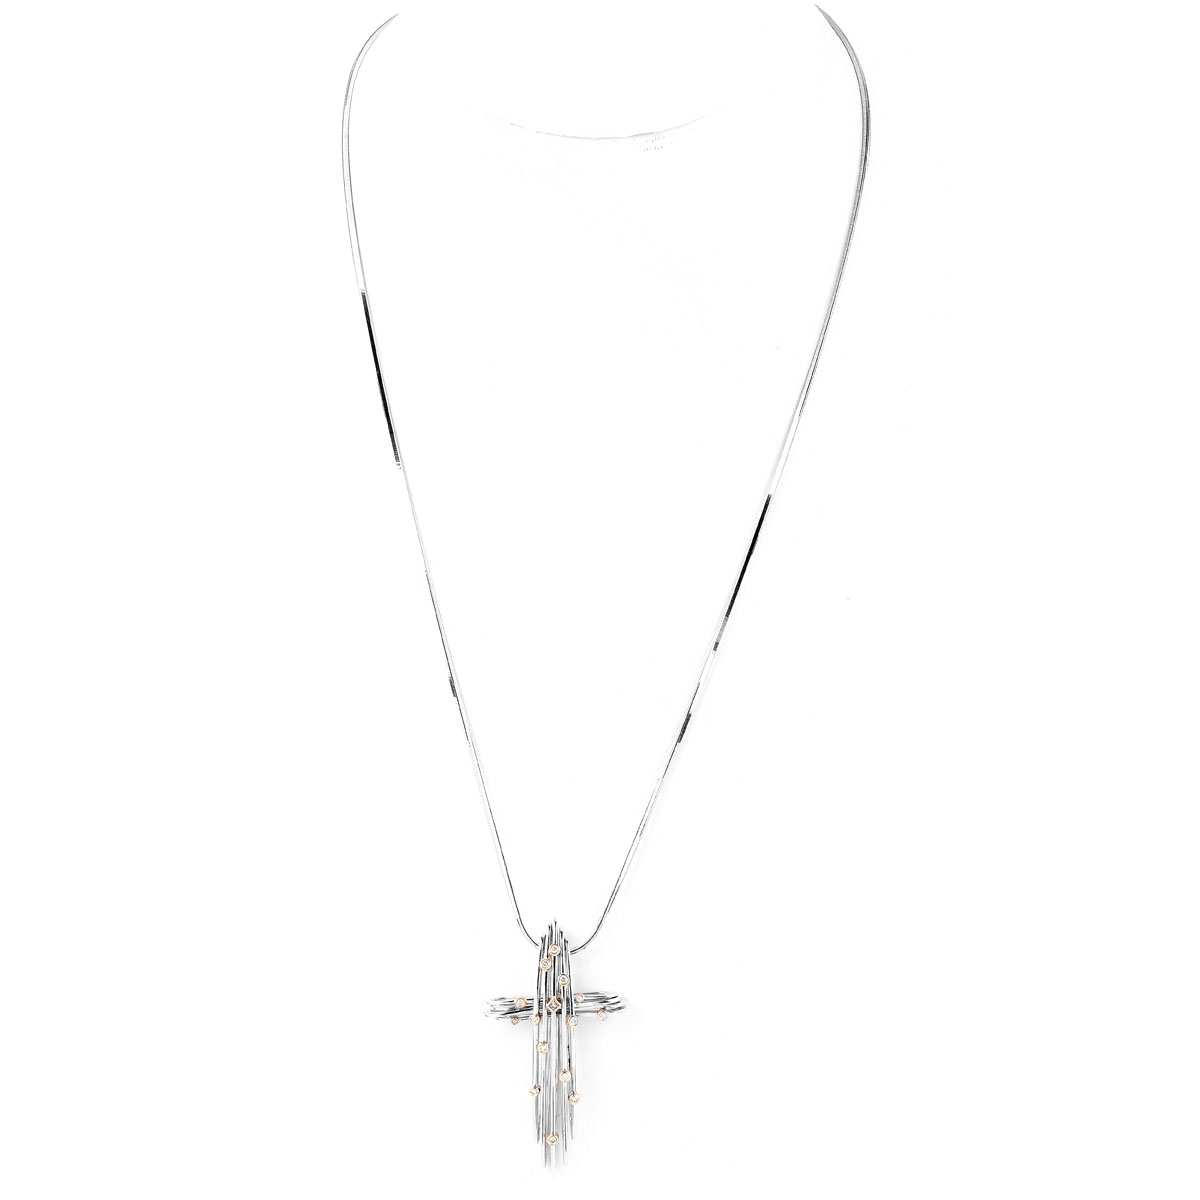 Vintage 14 Karat White Gold Cross Pendant with Diamond Accents with 18 Karat White Gold Chain. Each stamped as described.